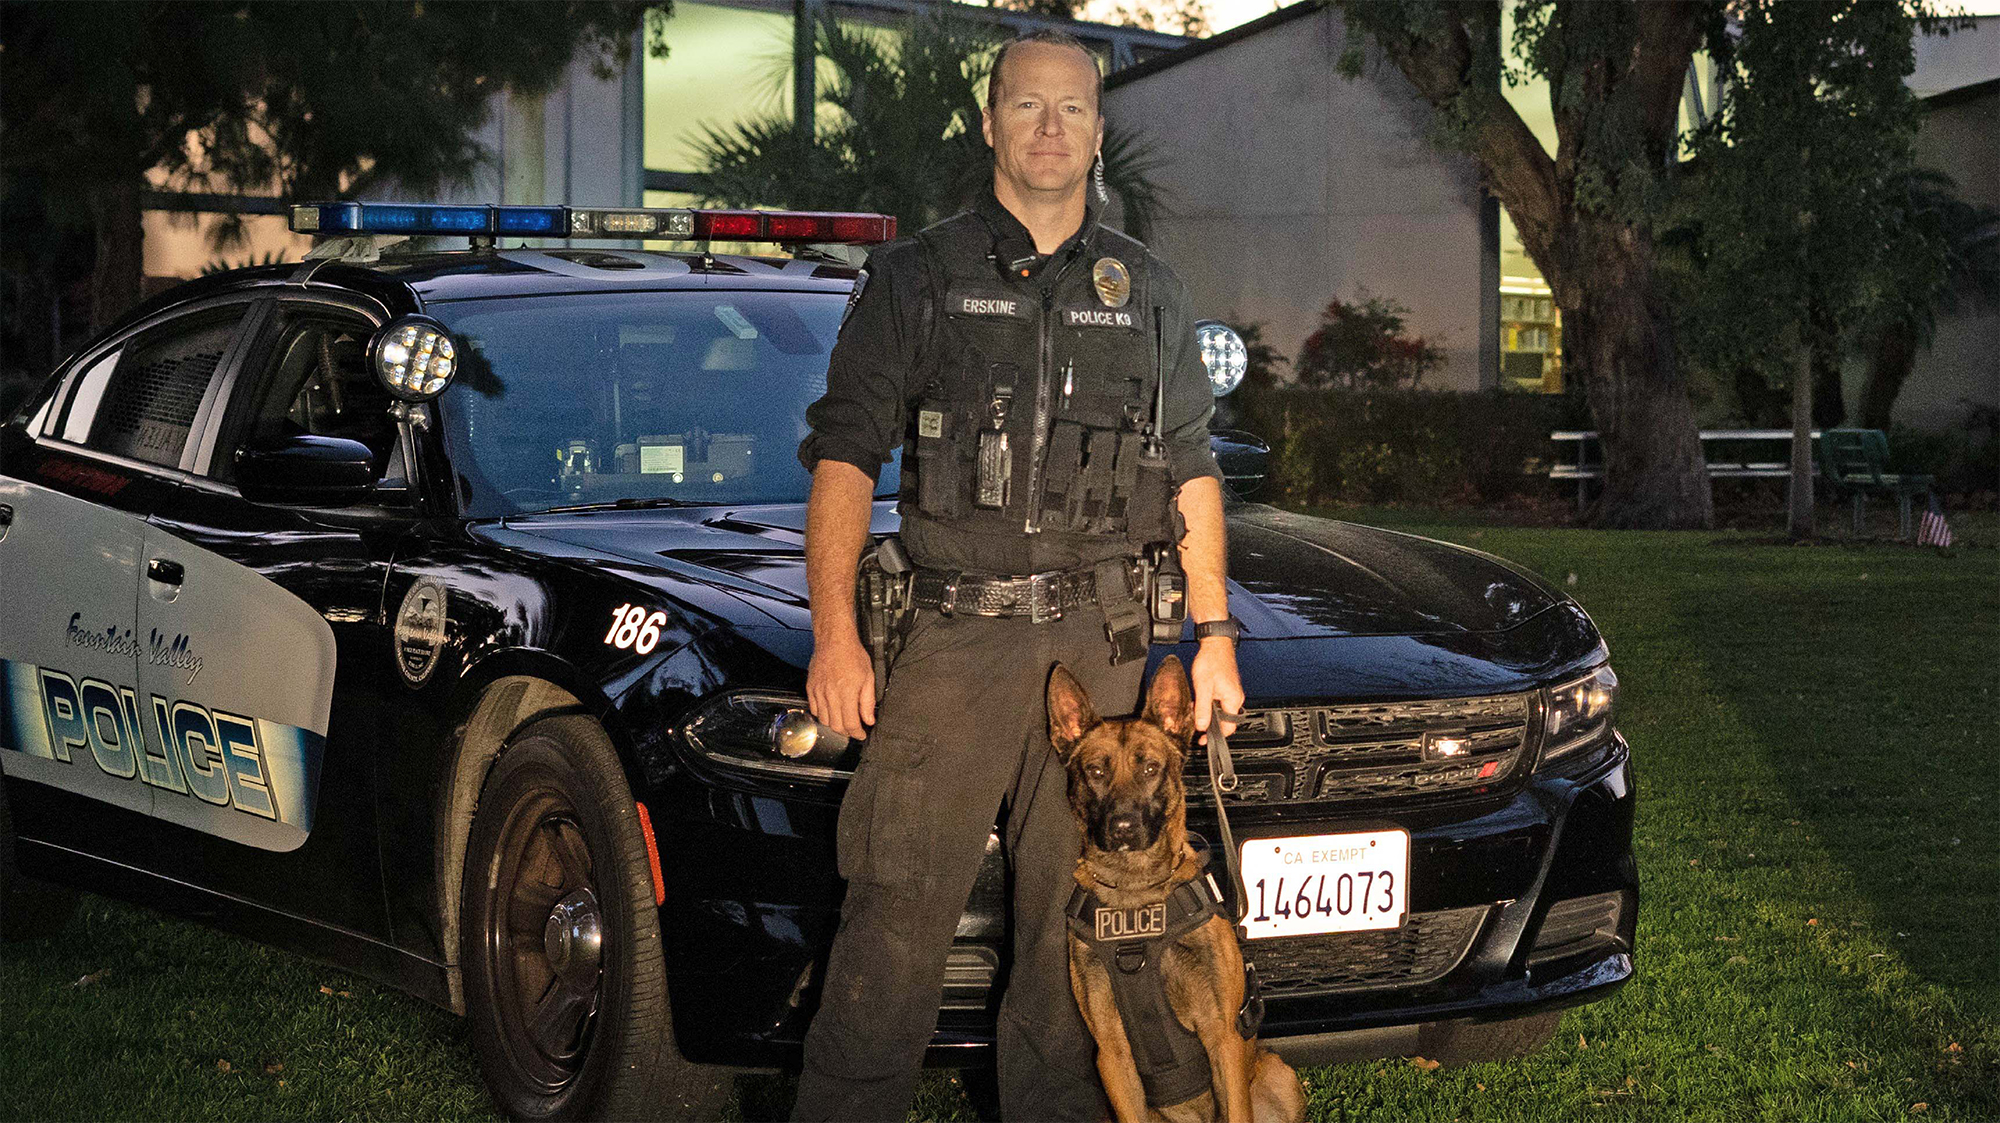 Cannon the K-9 with Officer